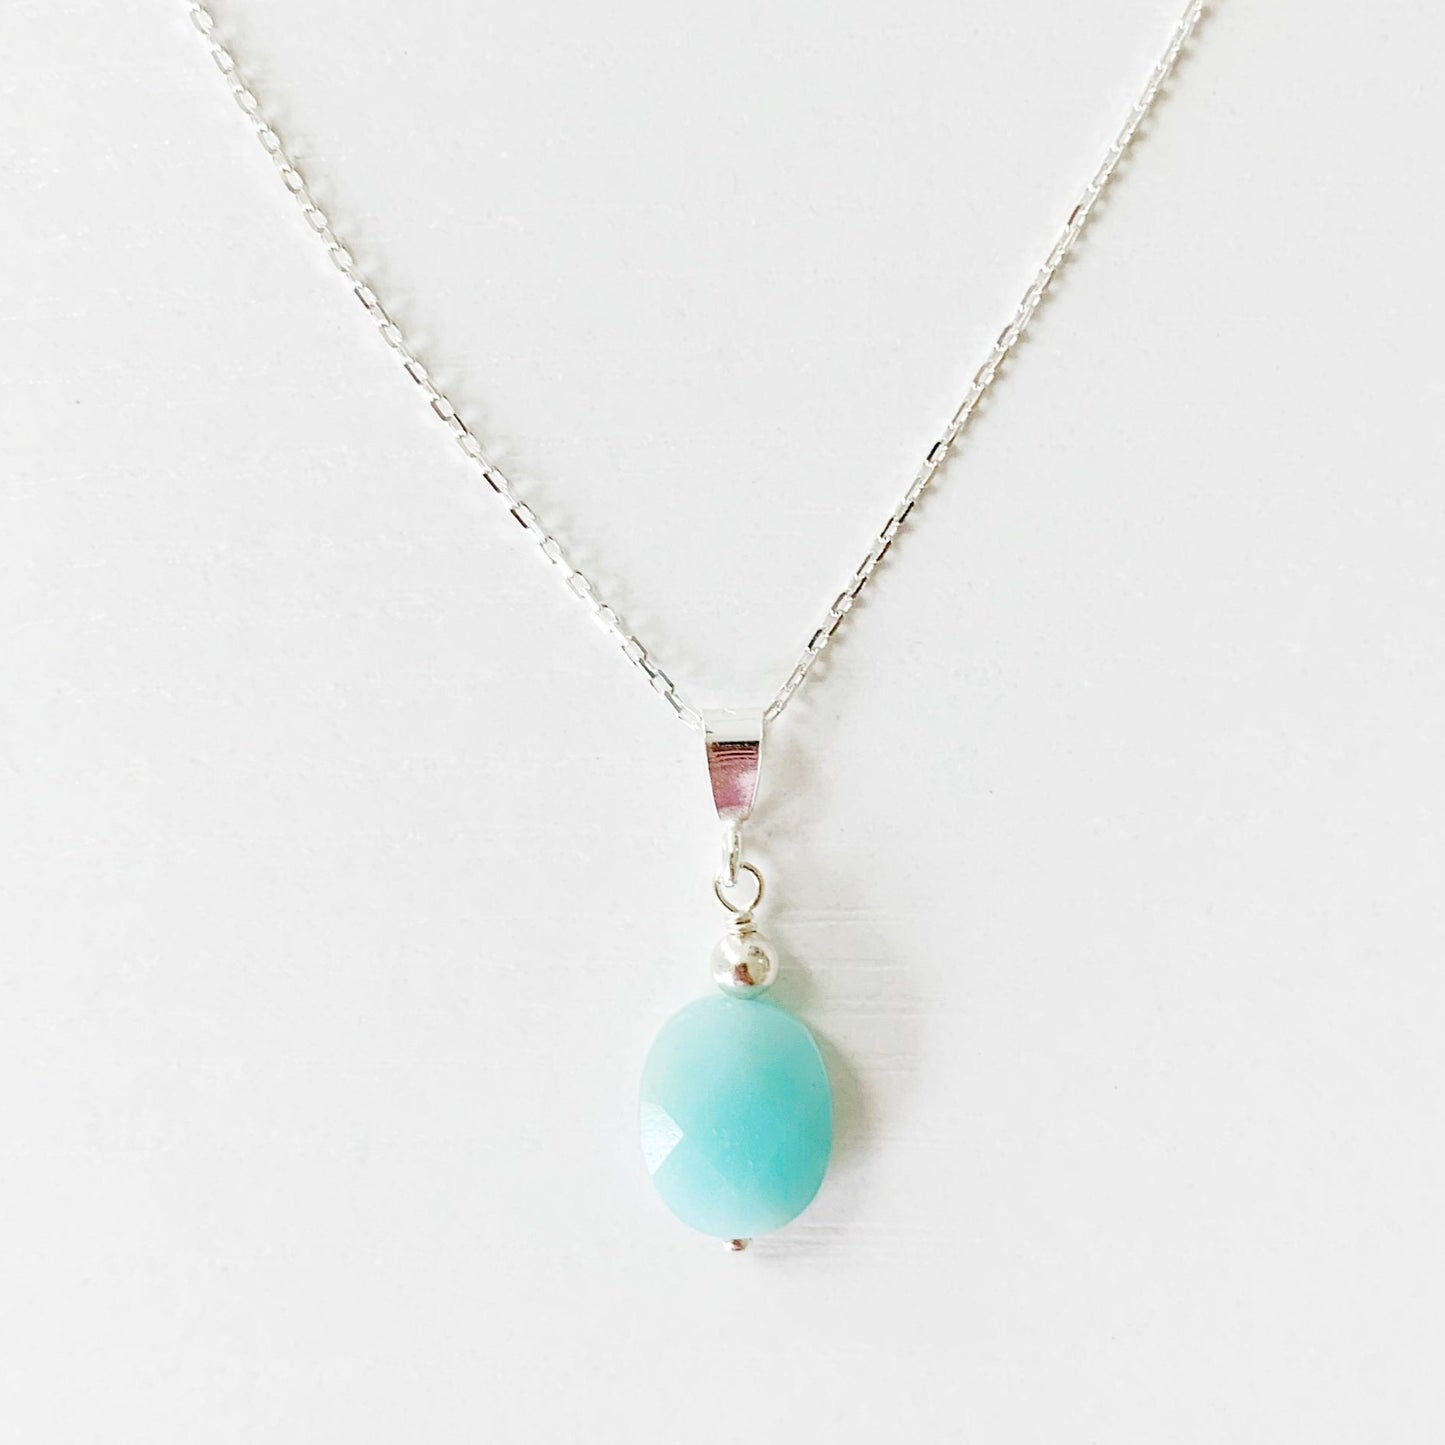 the mermaids and madeleines laguna necklace is designed with a faceted amazonite bead suspended as a pendent from sterling silver chain and findings. this necklace is photographed on a white surface